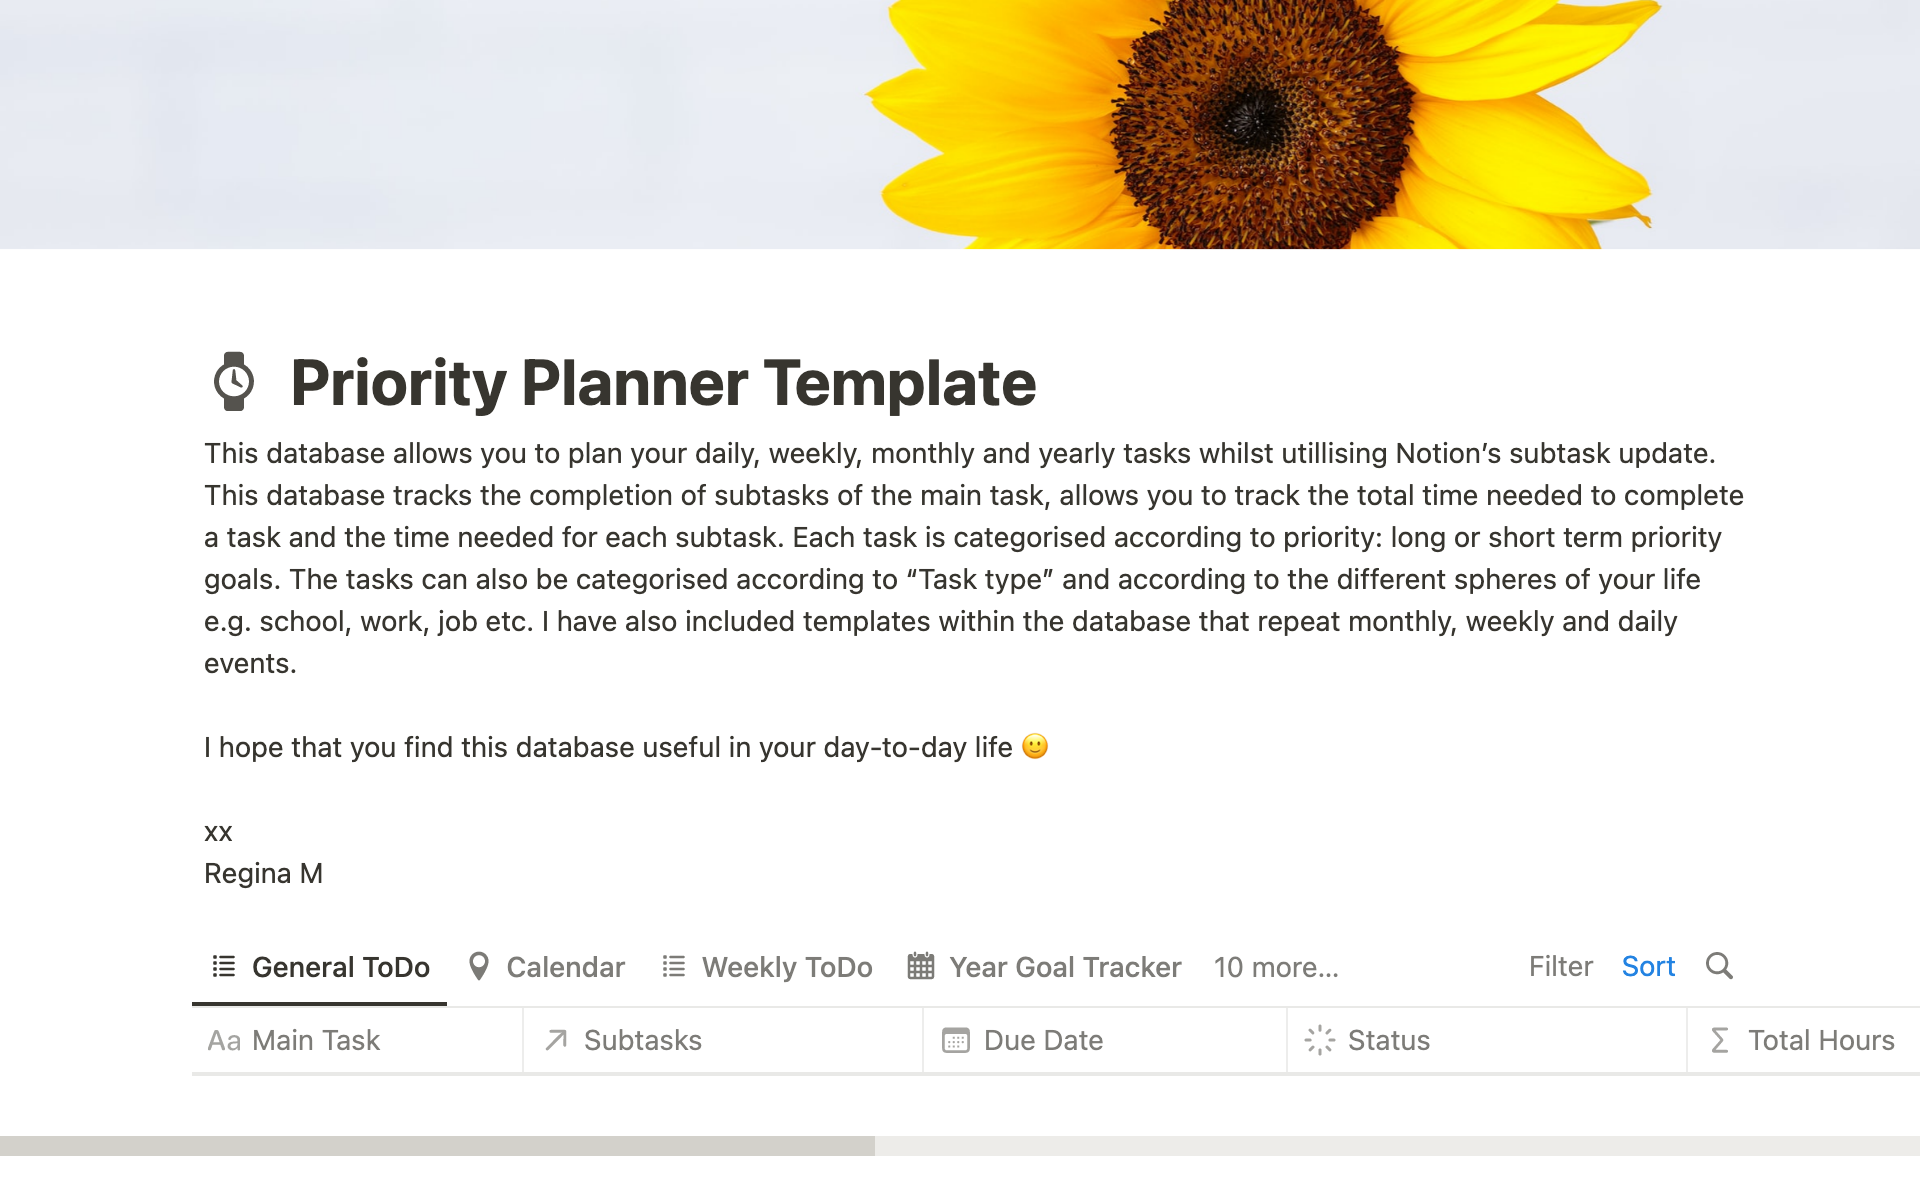 This database allows you to plan your daily, weekly, monthly and yearly tasks whilst utillising Notion’s subtask update.